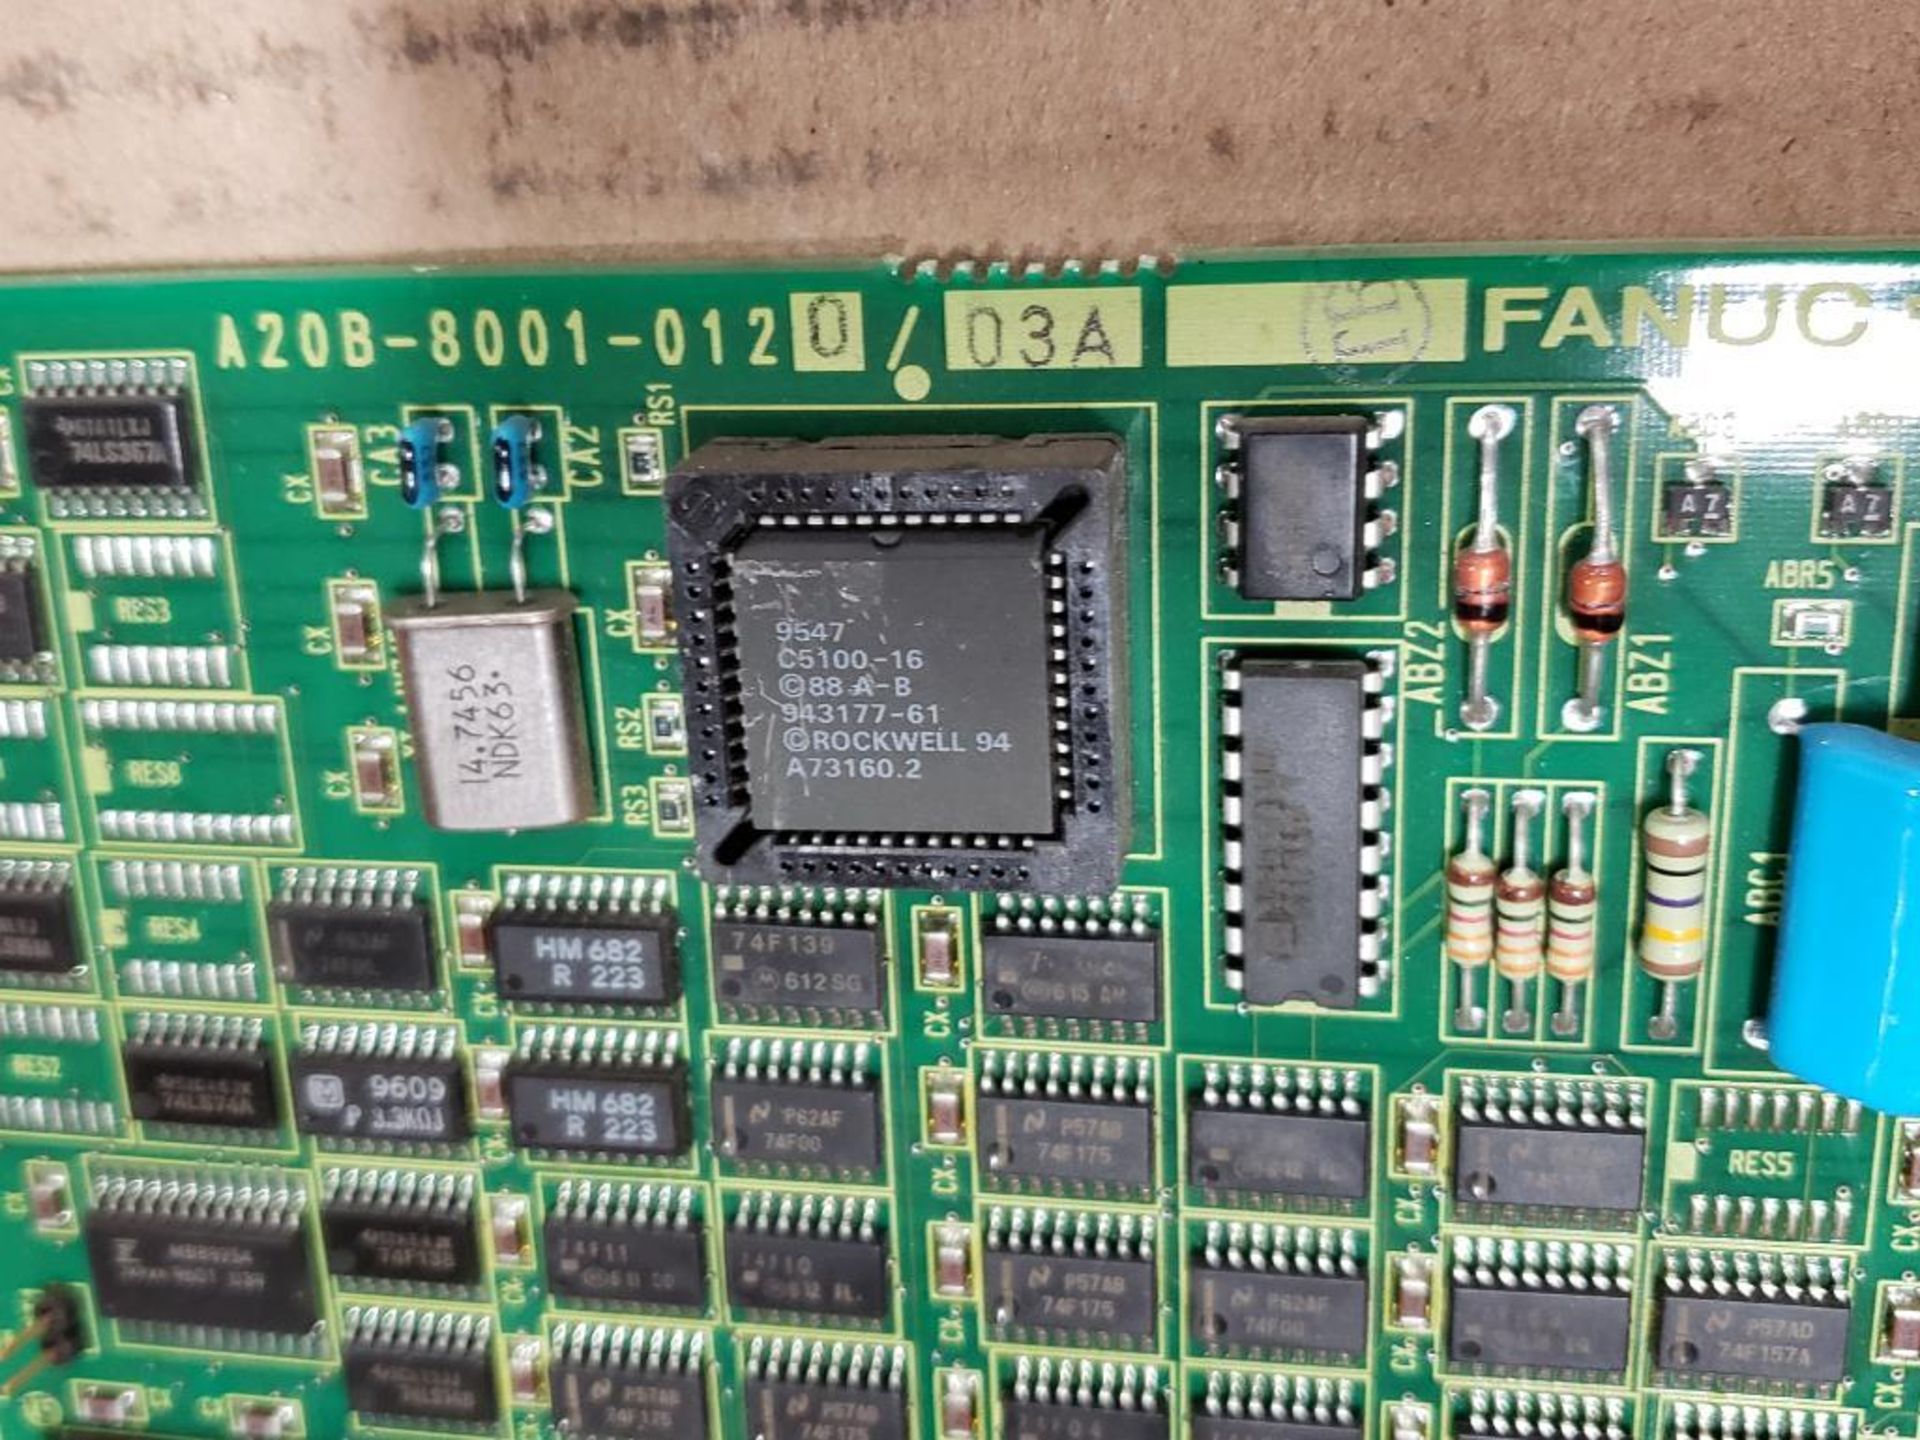 Fanuc control board. Part number A20B-8001-0120/03A. - Image 7 of 8